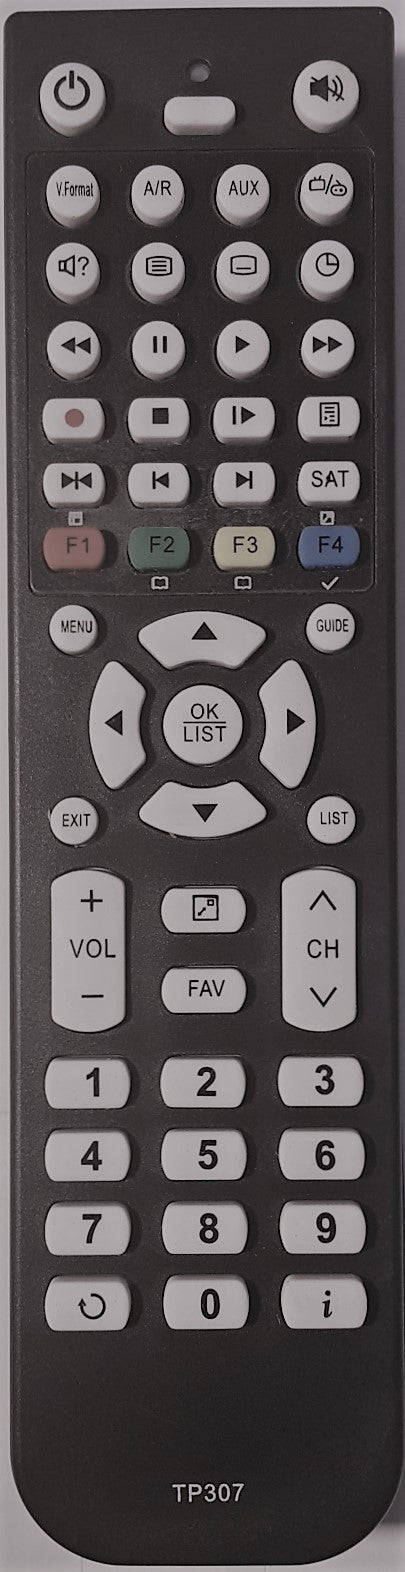 REPLACEMENT TOPFIELD REMOTE CONTROL TP807 - TRF7170 TRF-7170 DVR PVR RECORDER - Remote Control Warehouse